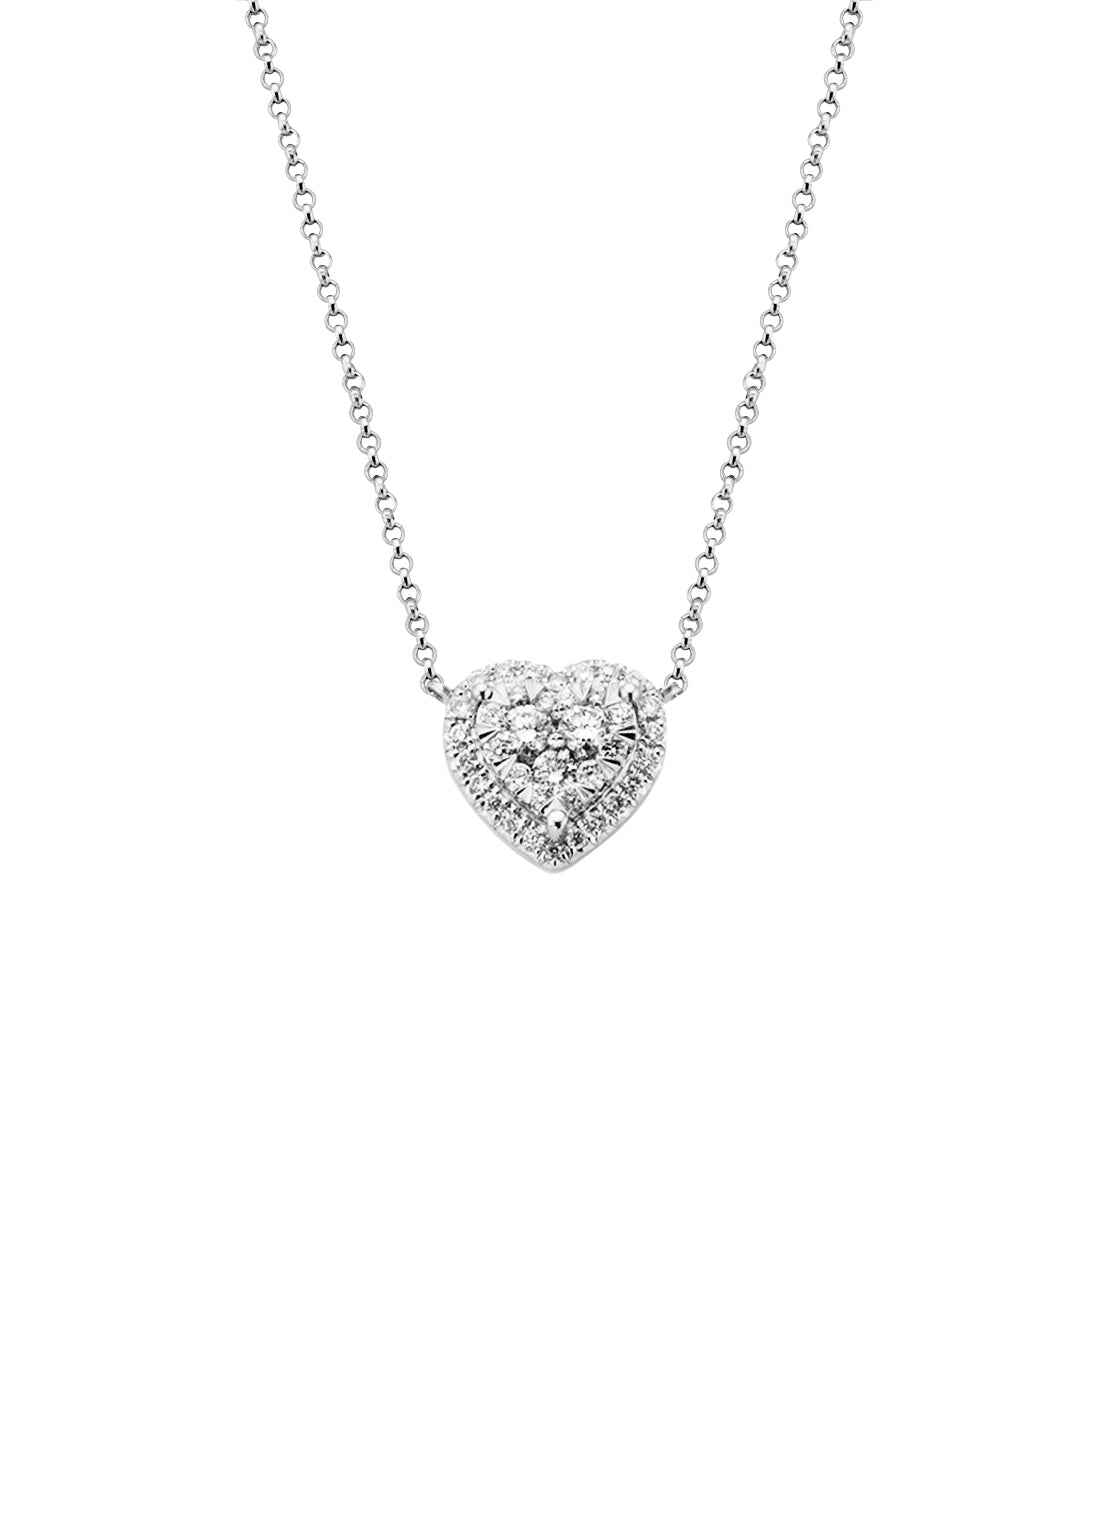 White gold necklace, 0.39 CT Diamond, Enchanted